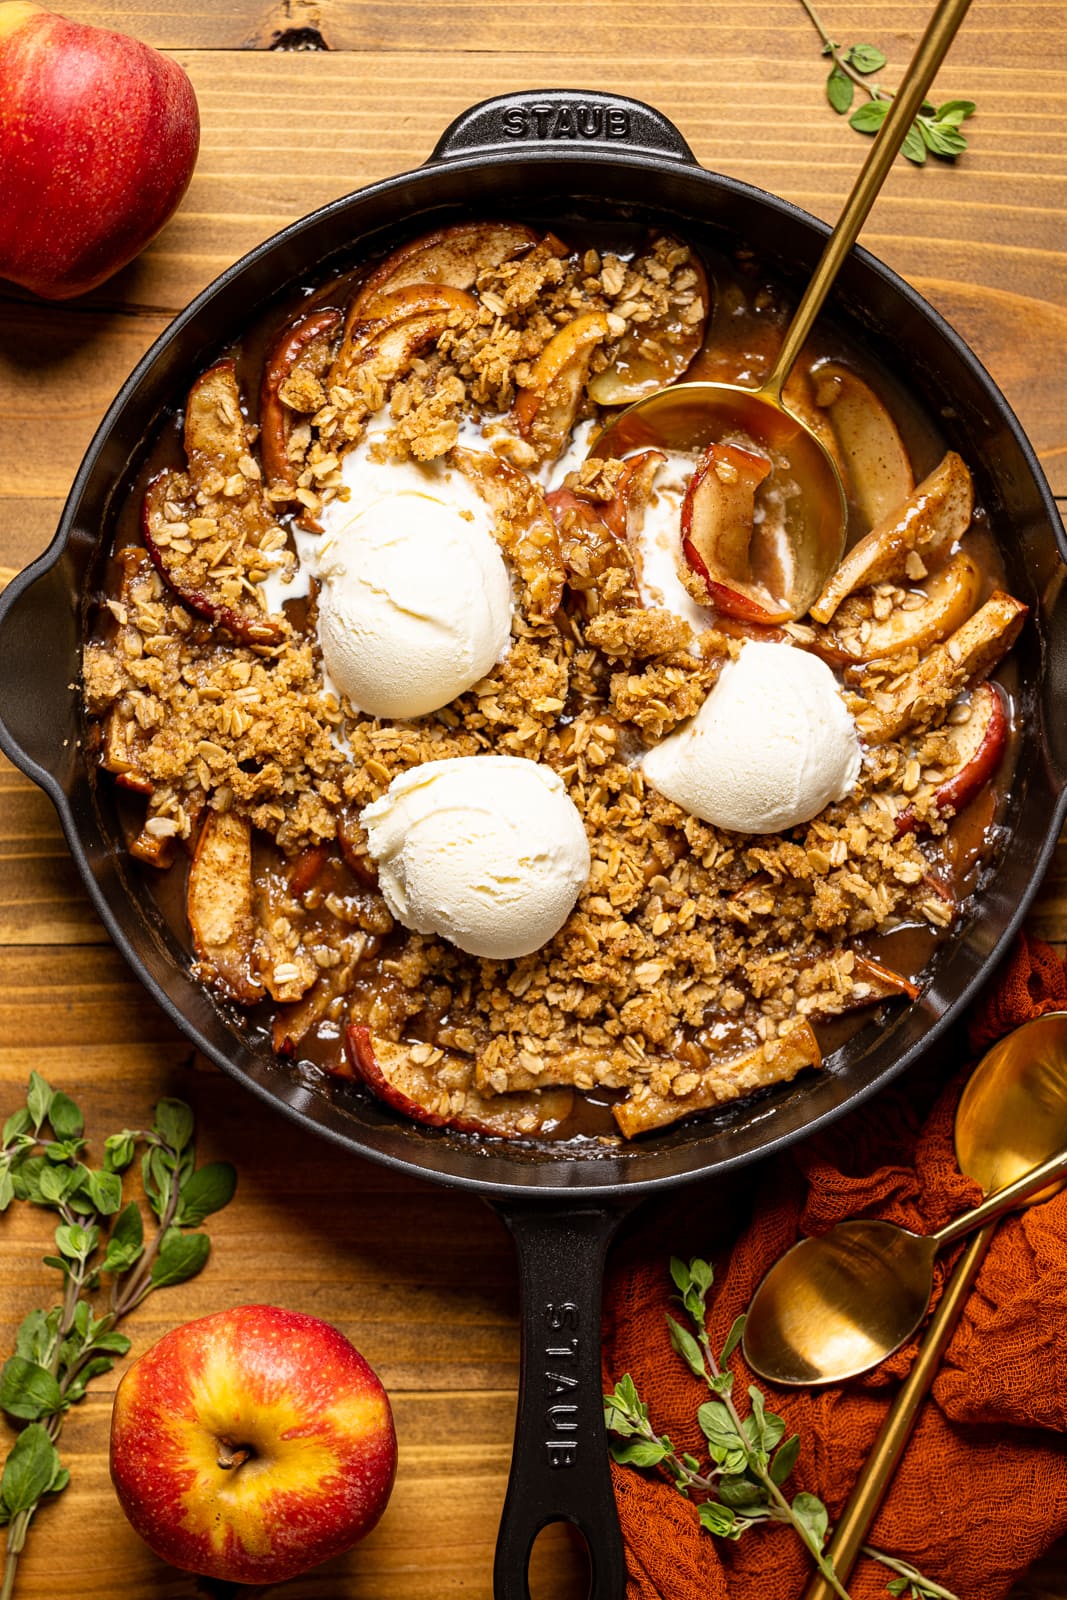 Baked apple crisp in a black skillet with scoops of ice cream, spoons, apples, and herbs.